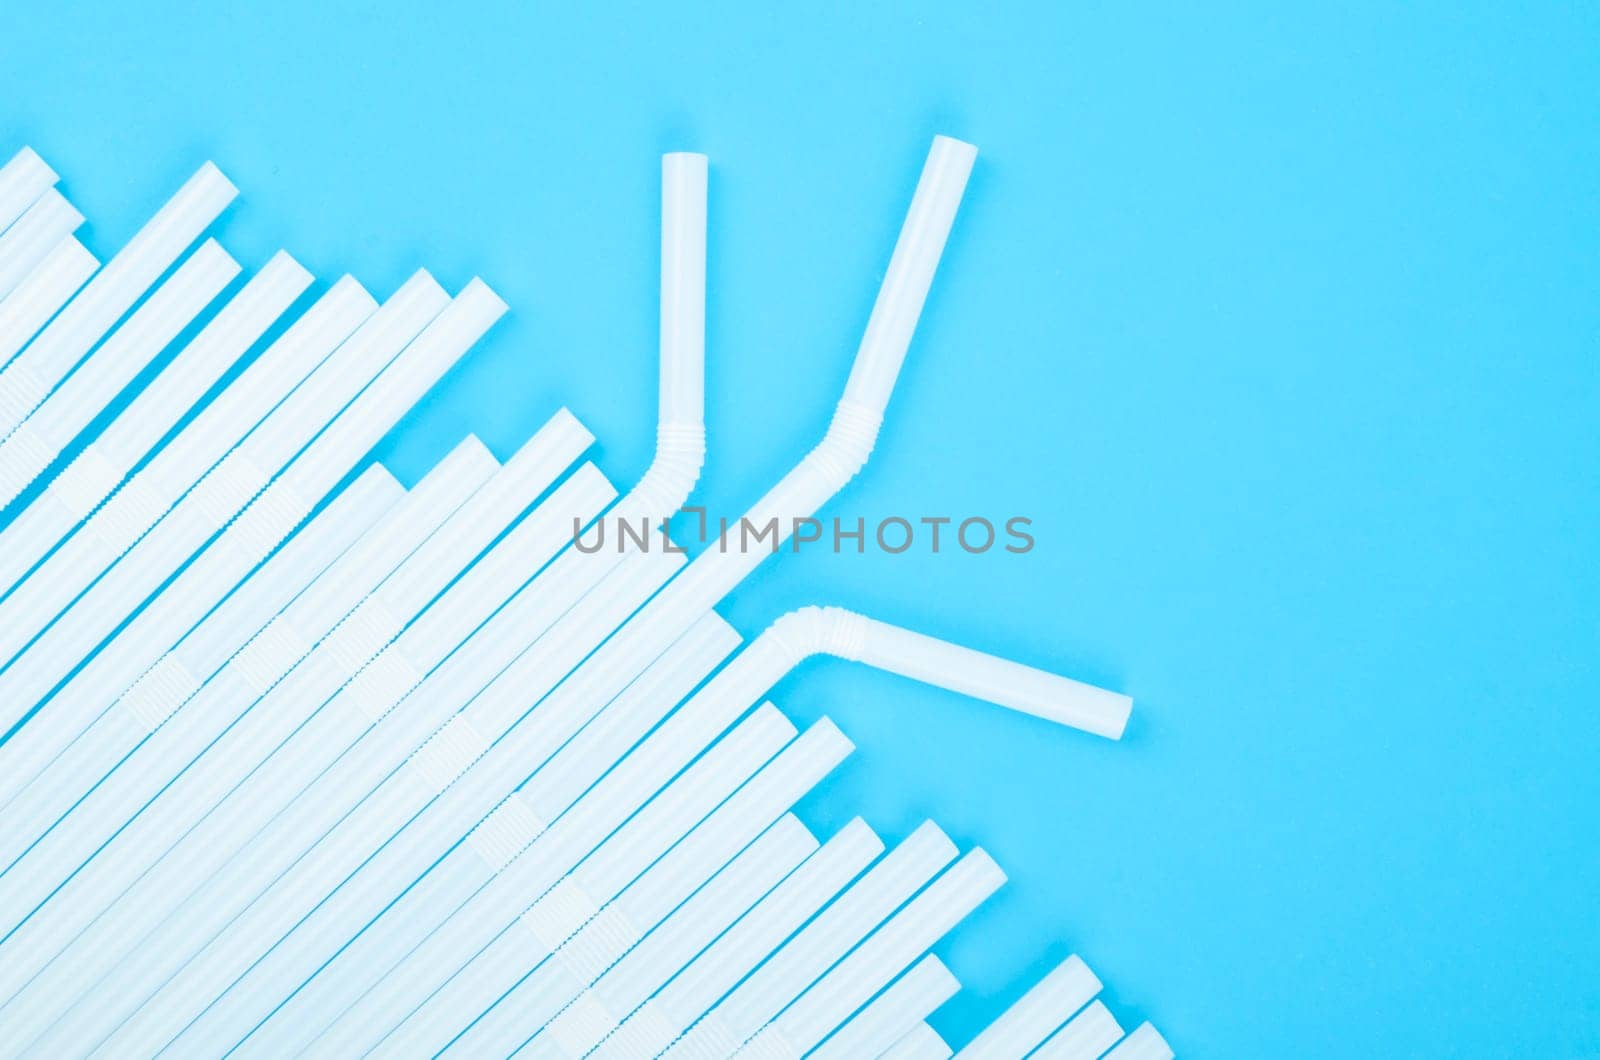 The group of plastic white drinking straw on blue background by Gamjai